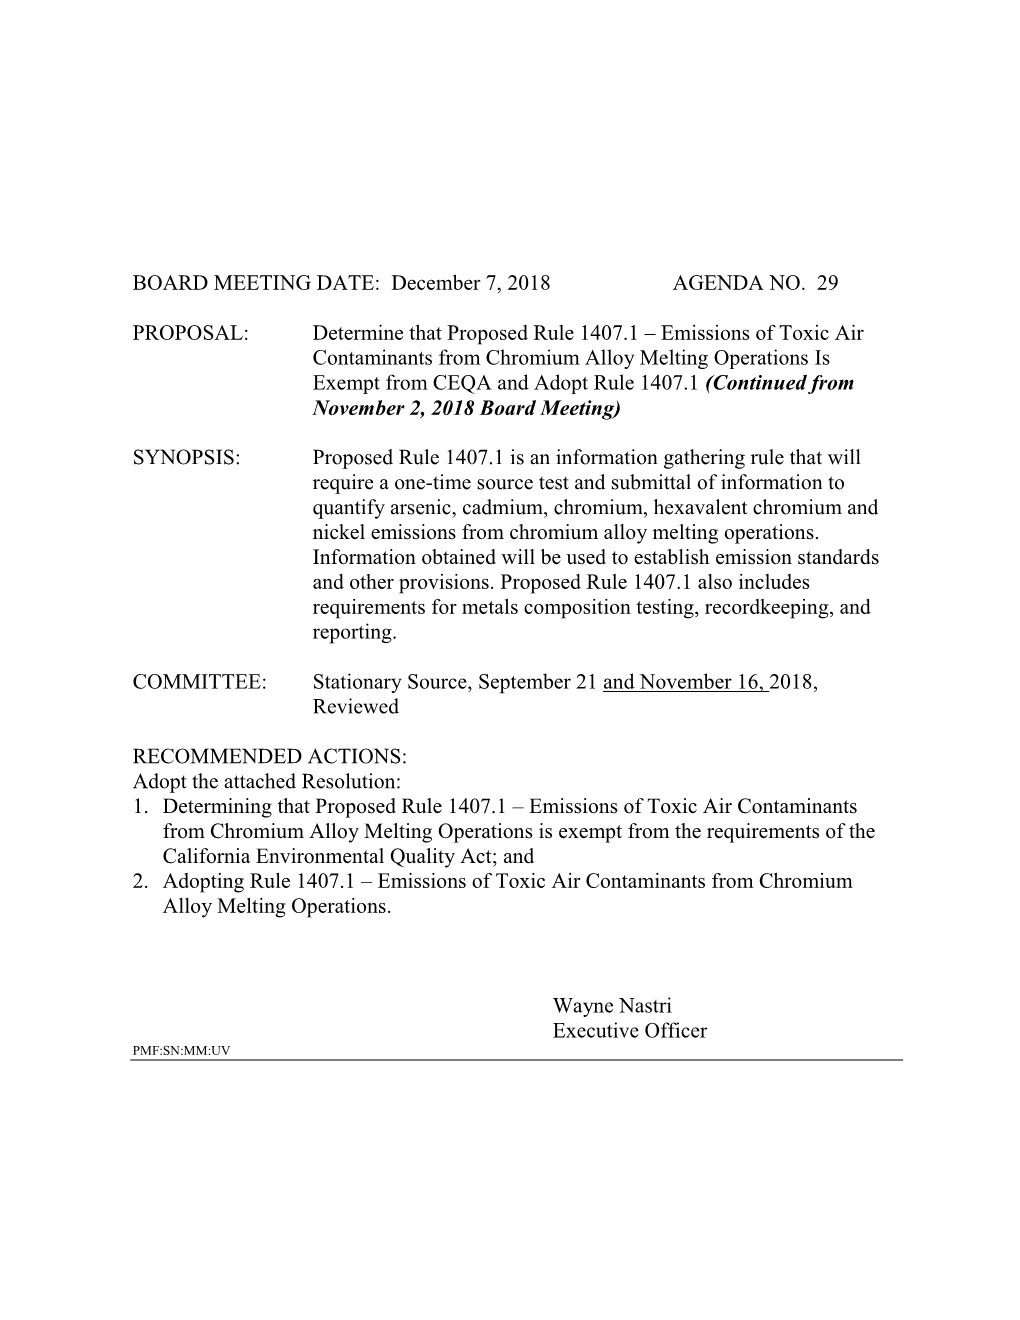 Emissions of Toxic Air Contaminants from Chromium Alloy Melting Operations Is Exempt from CEQA and Adopt Rule 1407.1 (Continued from November 2, 2018 Board Meeting)